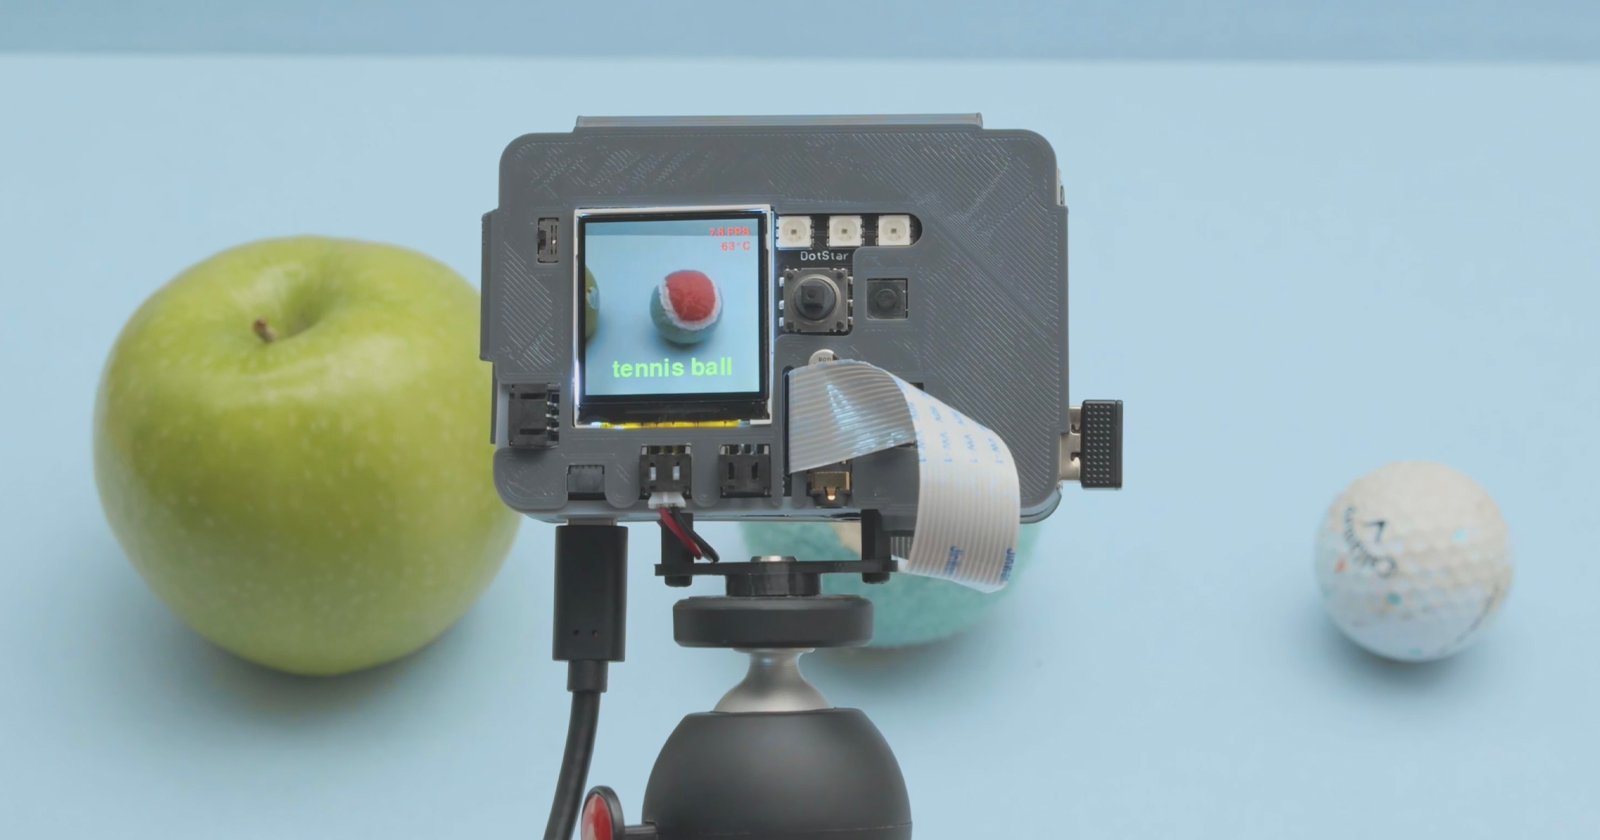 DIY Camera Uses Machine Learning to Audibly Tell You What it Sees